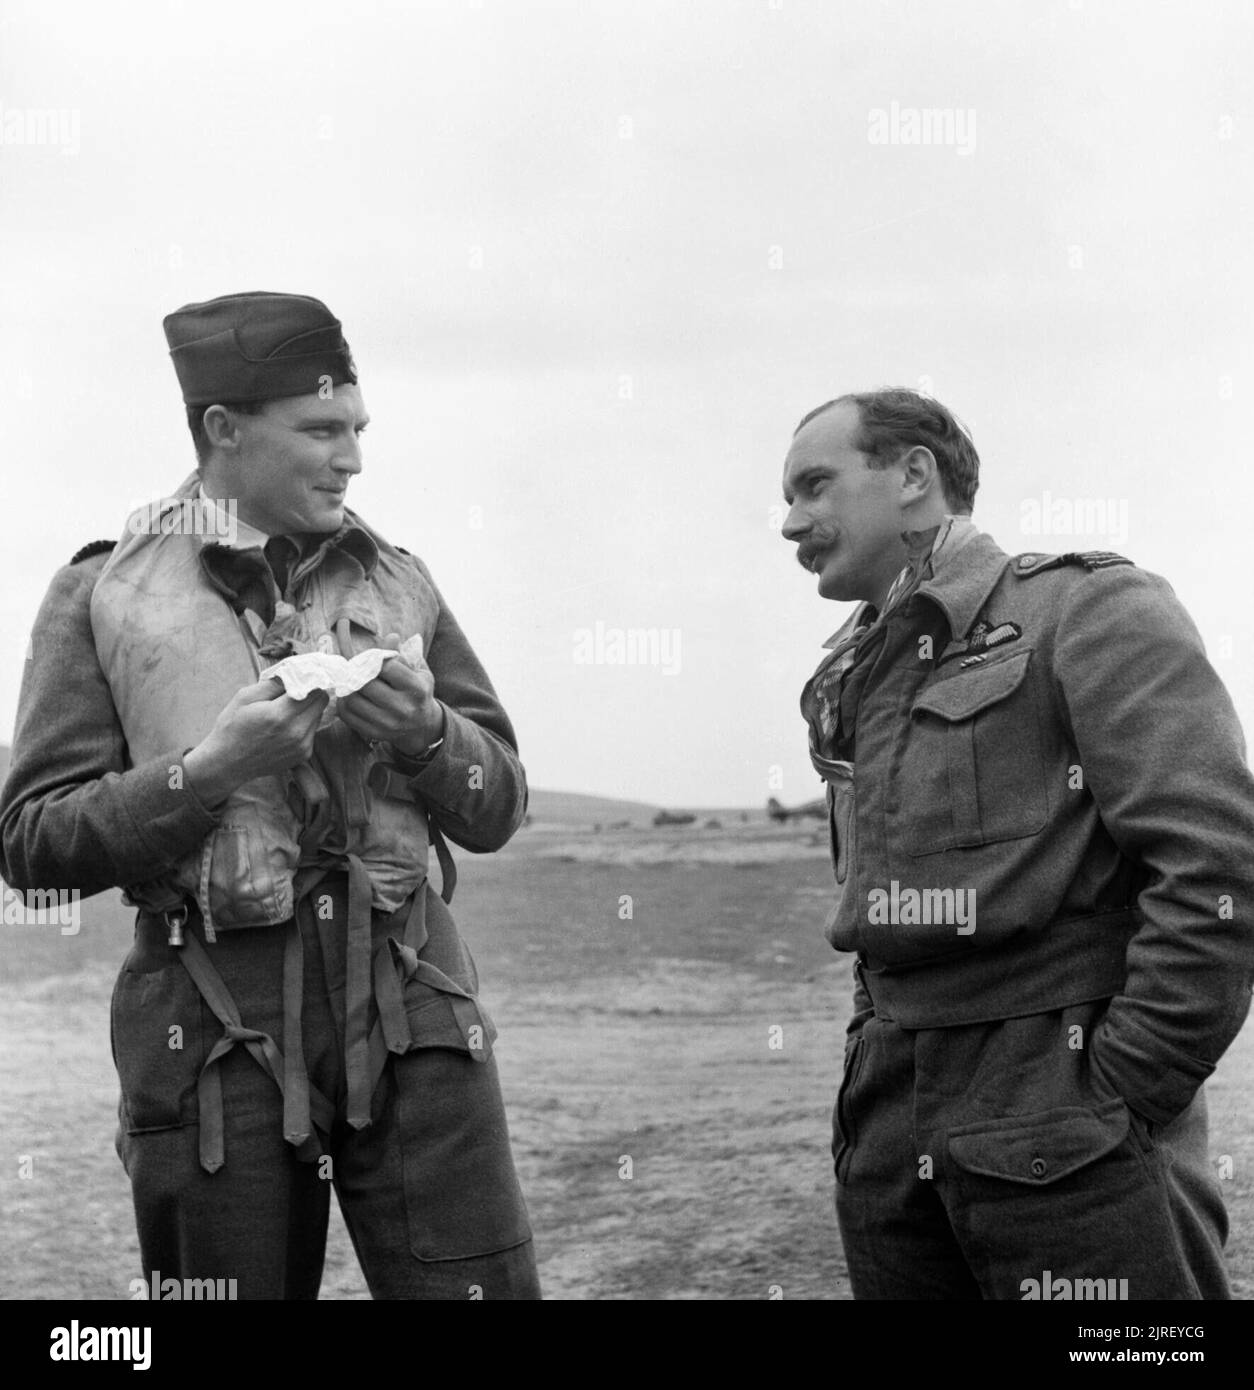 Royal Air Force Operations in the Middle East and North Africa, 1939-1943. Group Captain P H 'Dutch' Hugo (left), Commanding Officer of No. 322 Wing RAF, and Wing Commander R 'Raz' Berry, who took over leadership of the Wing in January 1943, conversing at Tingley, Algeria. Petrus Hendrik Hugo, a South African, joined the RAF on a short-service commission in February 1939. He flew with No. 615 Squadron RAF during the Battle of France and the Battle of Britain, and became a flight commander in September 1941. He was posted to command No. 41 Squadron RAF in November 1941, and then took over the l Stock Photo